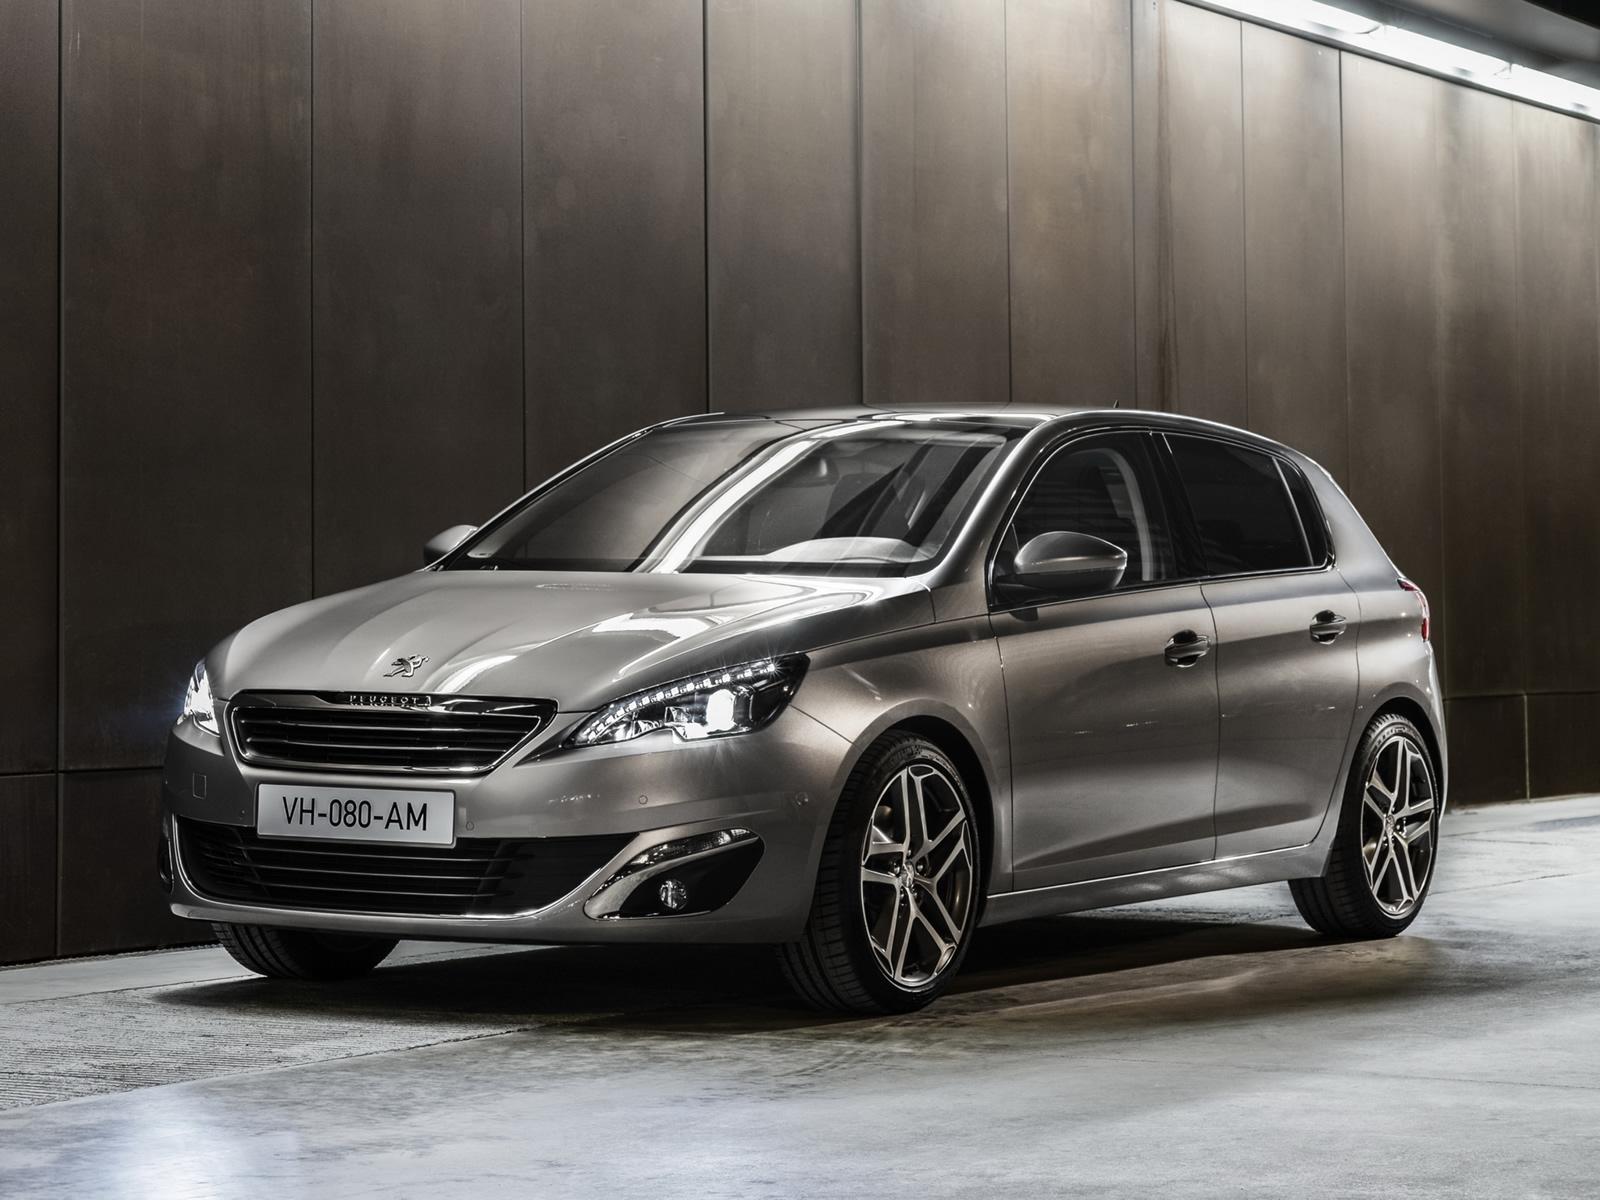 Amazing Peugeot 308 Pictures & Backgrounds